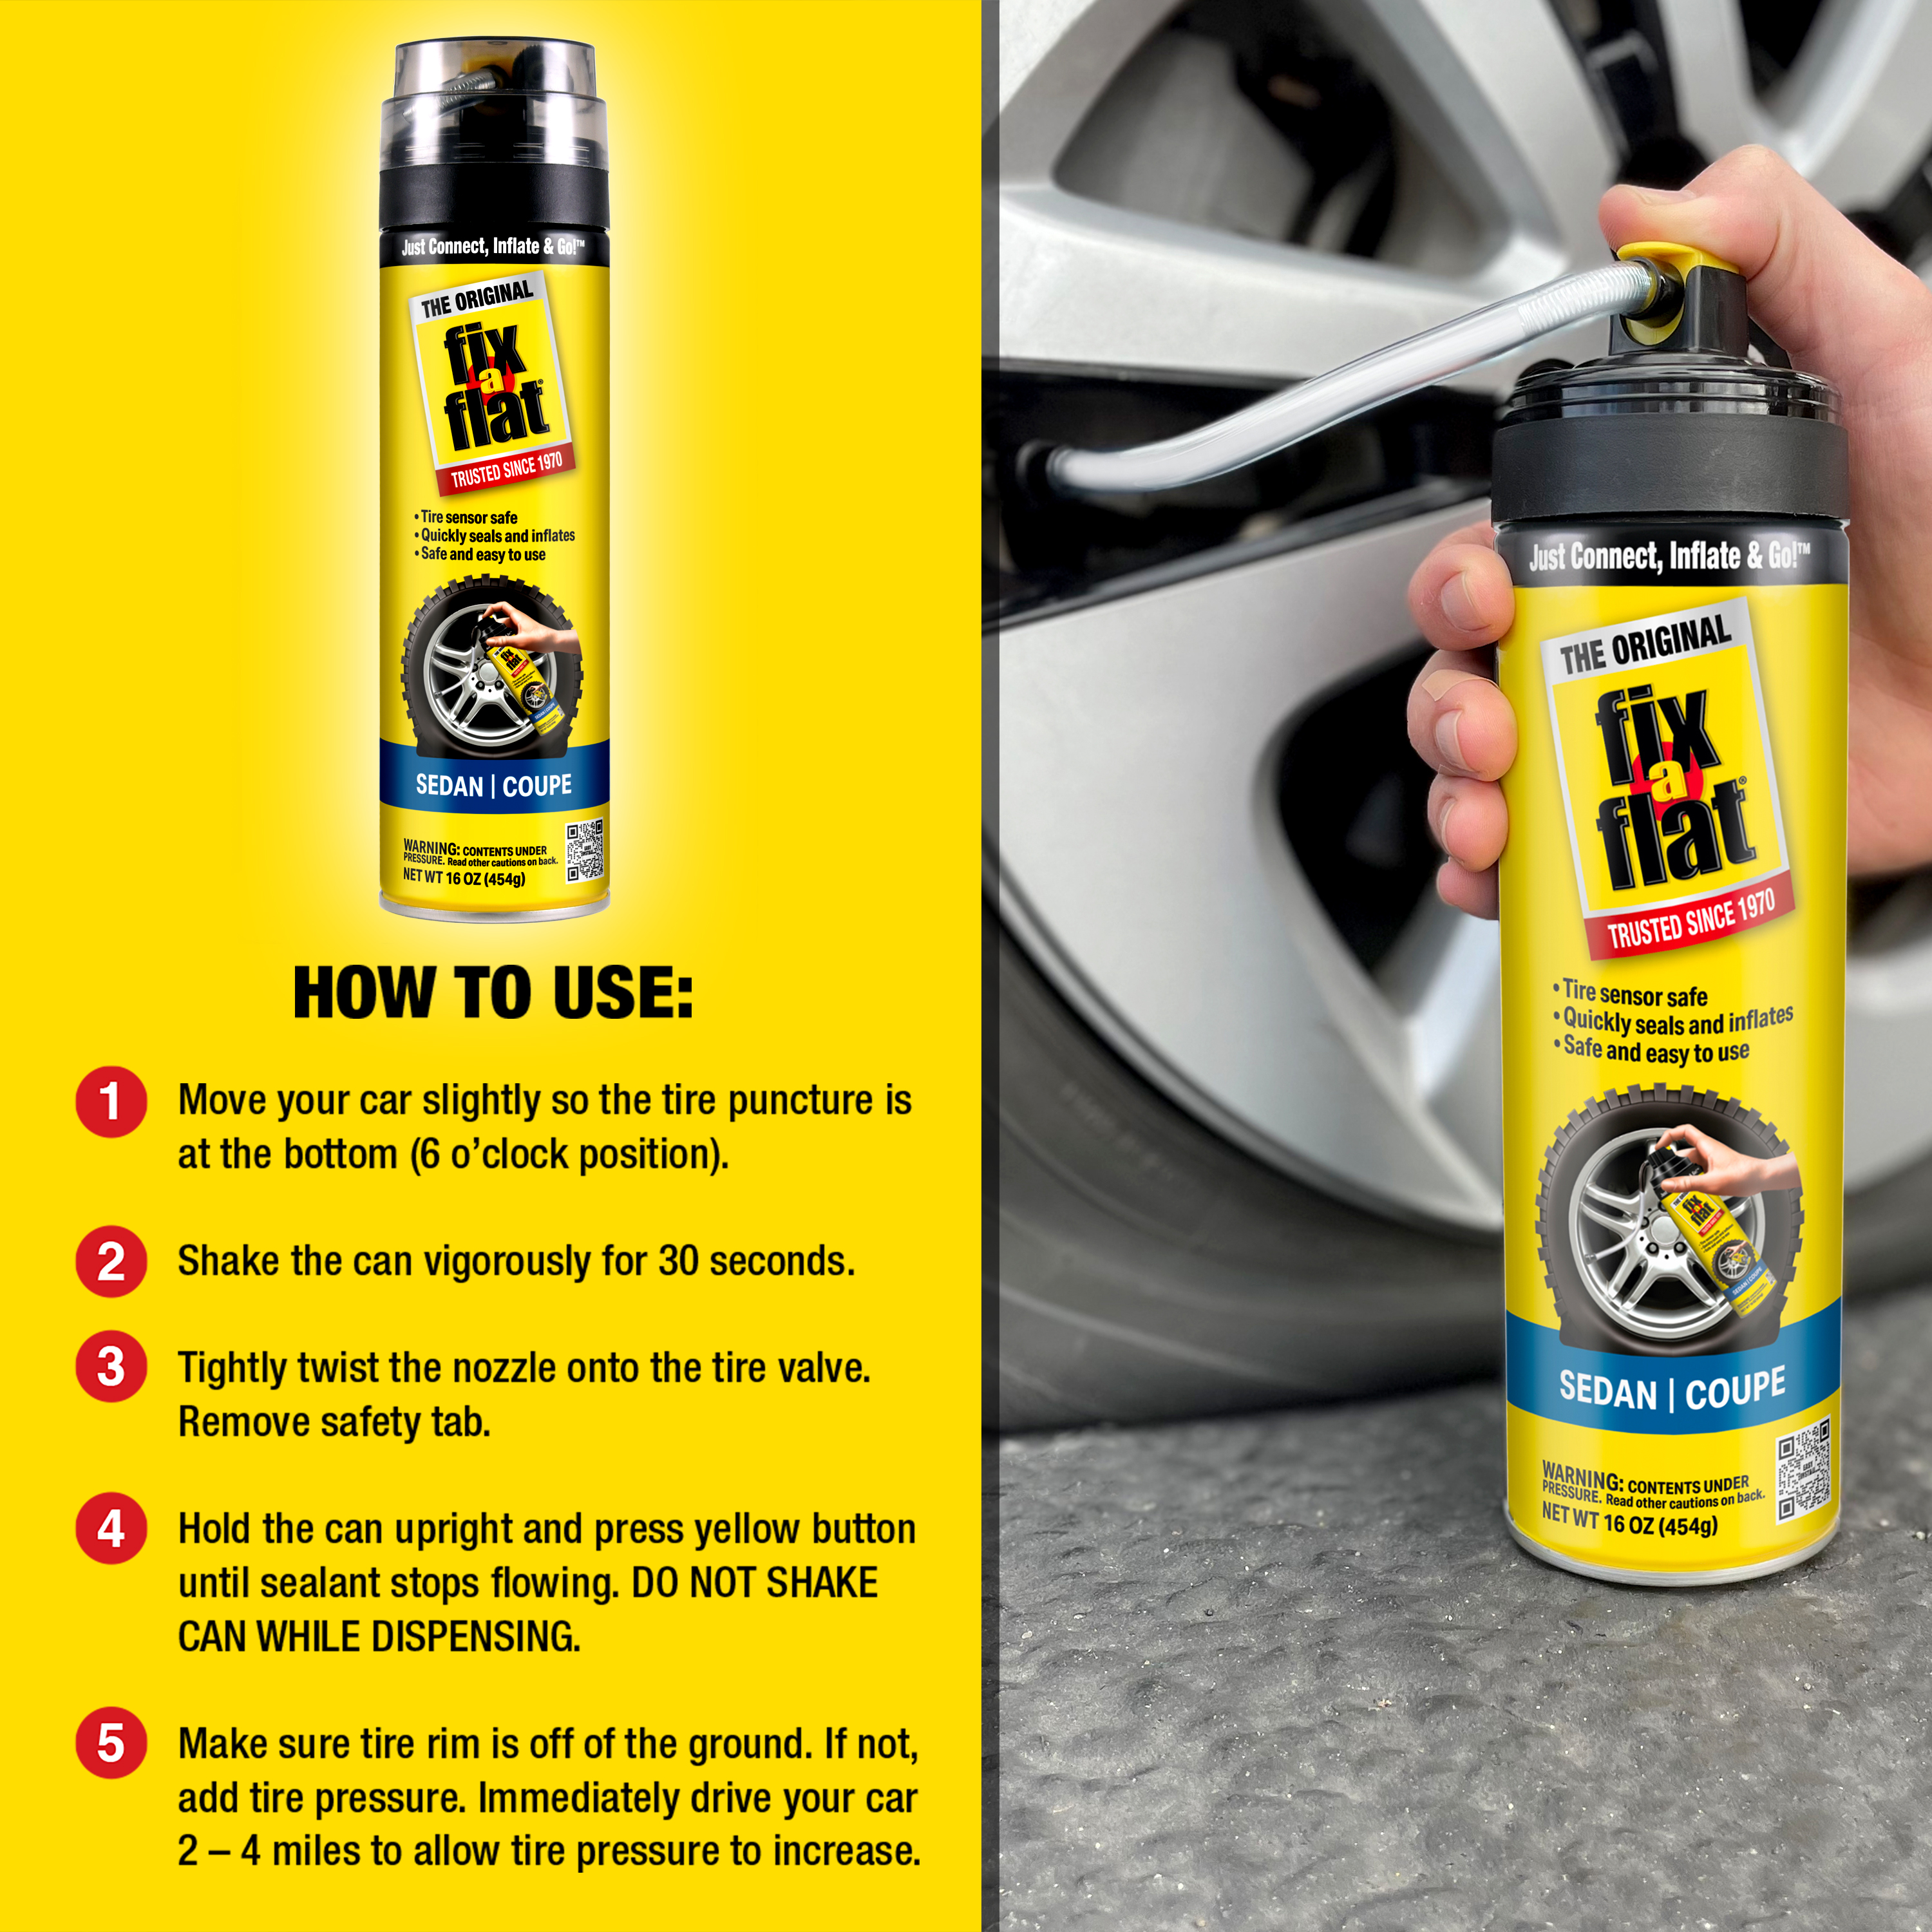 Fix-A-Flat Aerosol Emergency Flat Tire Repair and Inflator, for Standard Tires, Eco-Friendly Formula, Universal Fit for All Cars, 16 oz. (Pack of 1) - S60420 - image 5 of 9